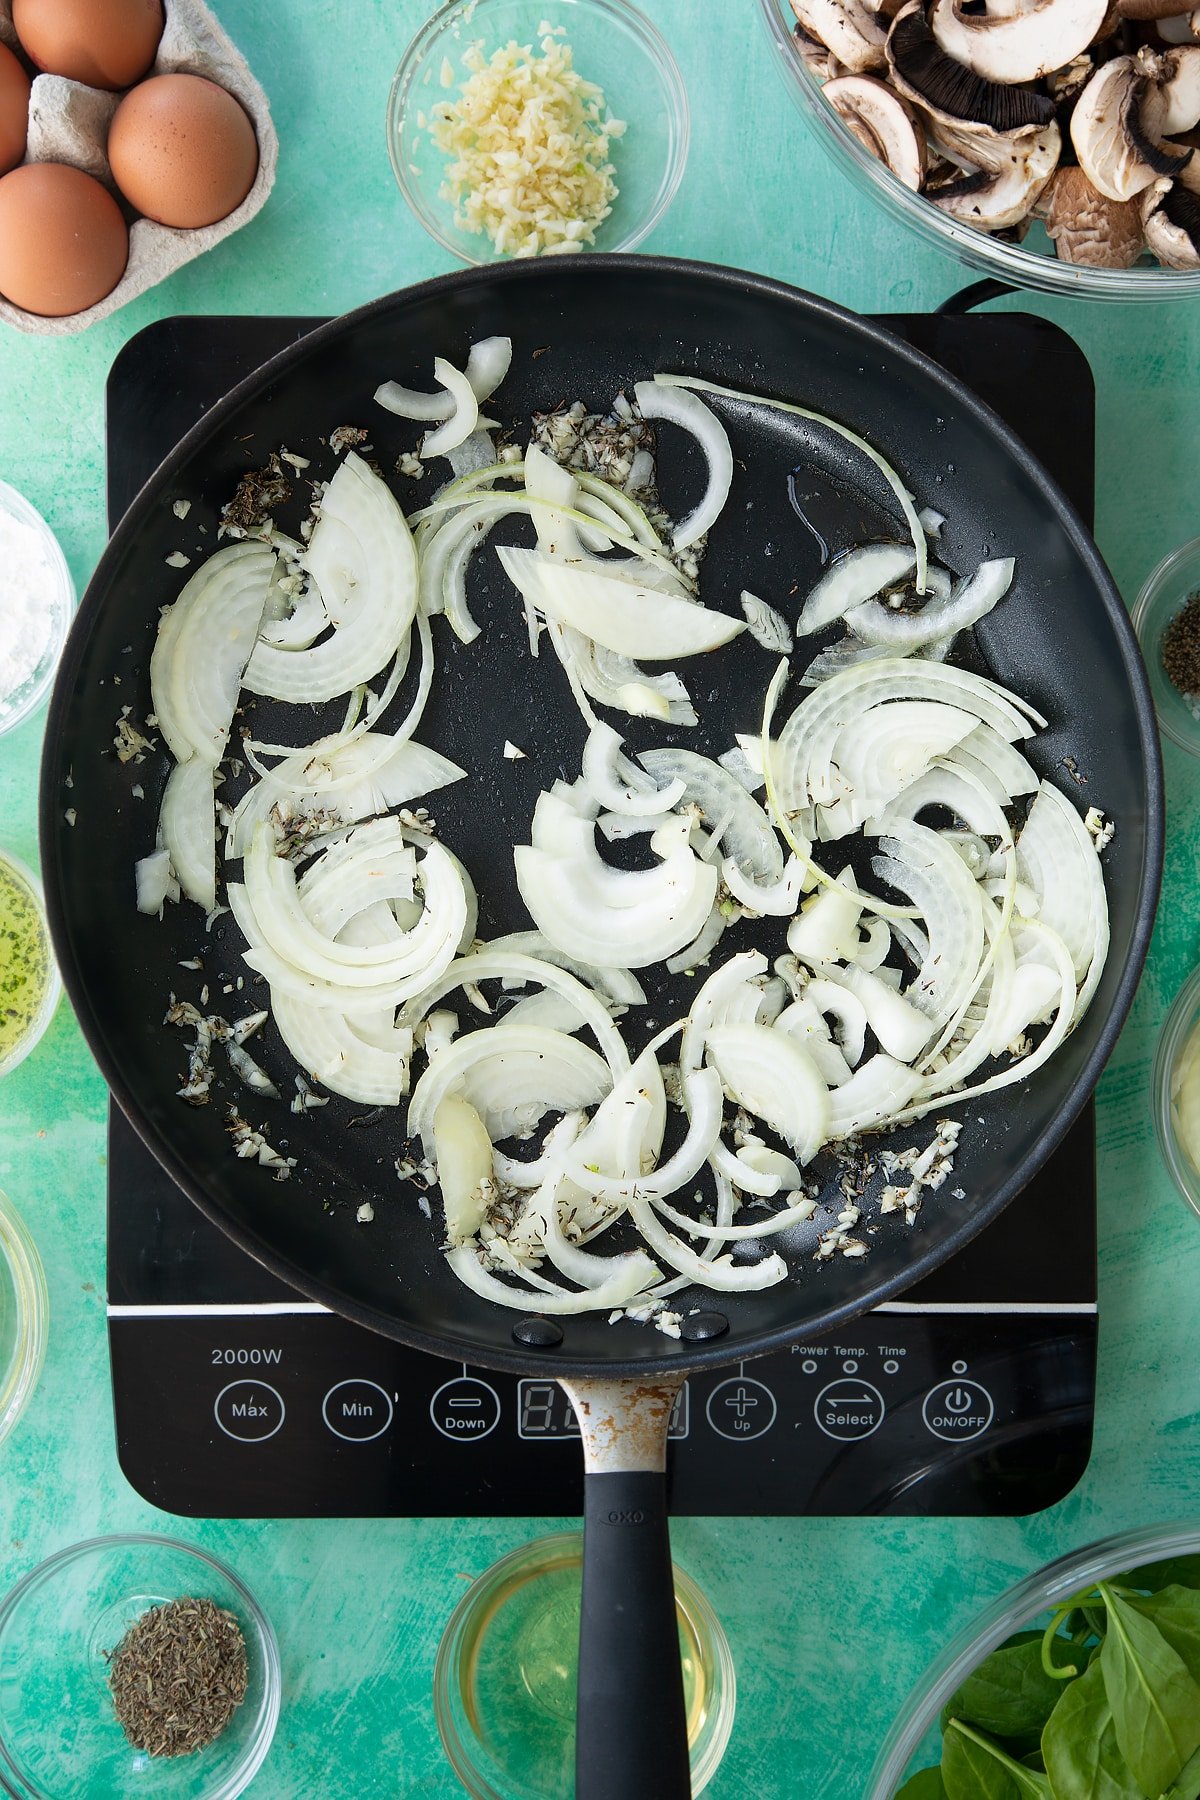 a large black frying pan on an induction hob with minced garlic, herbs and oil topped with uncooked onions.